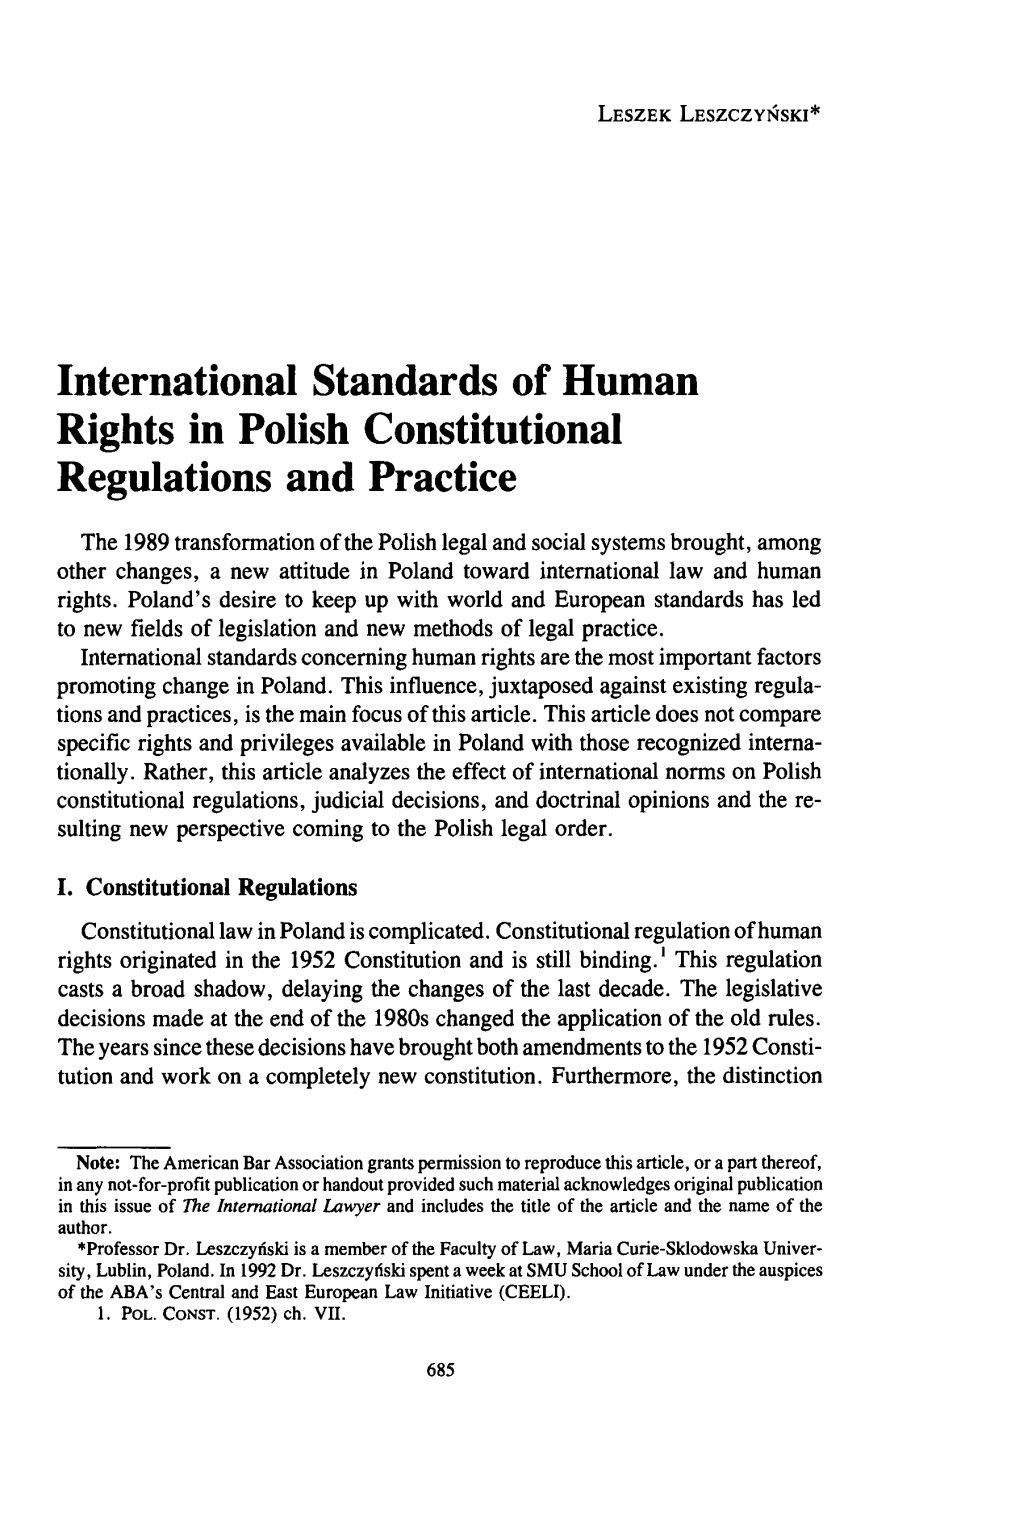 International Standards of Human Rights in Polish Constitutional Regulations and Practice